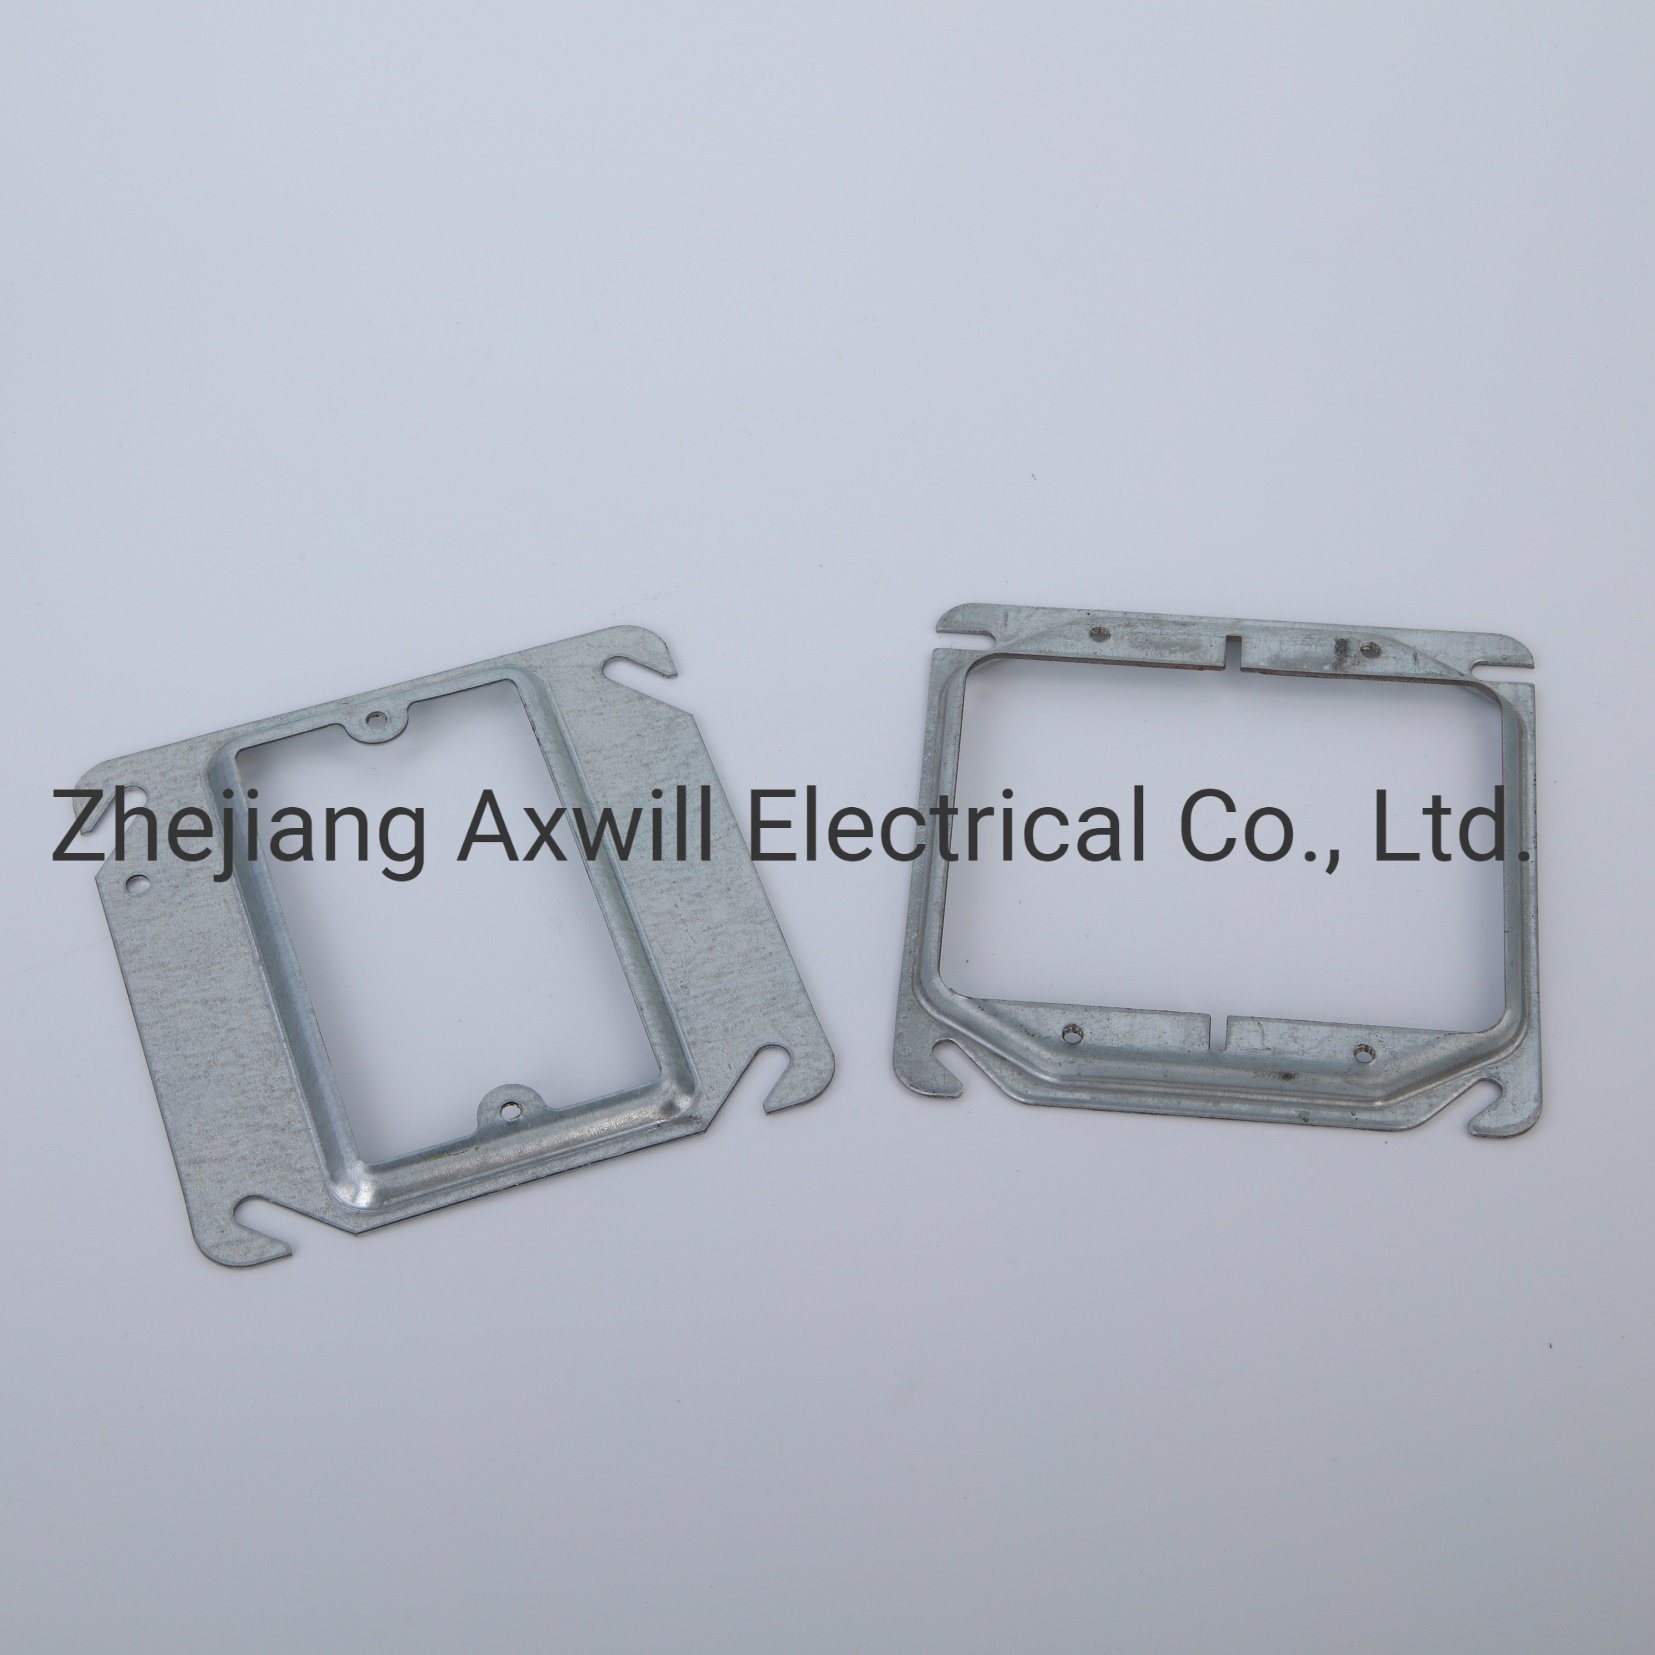 1.60mm UL Listed Square Outlet Box